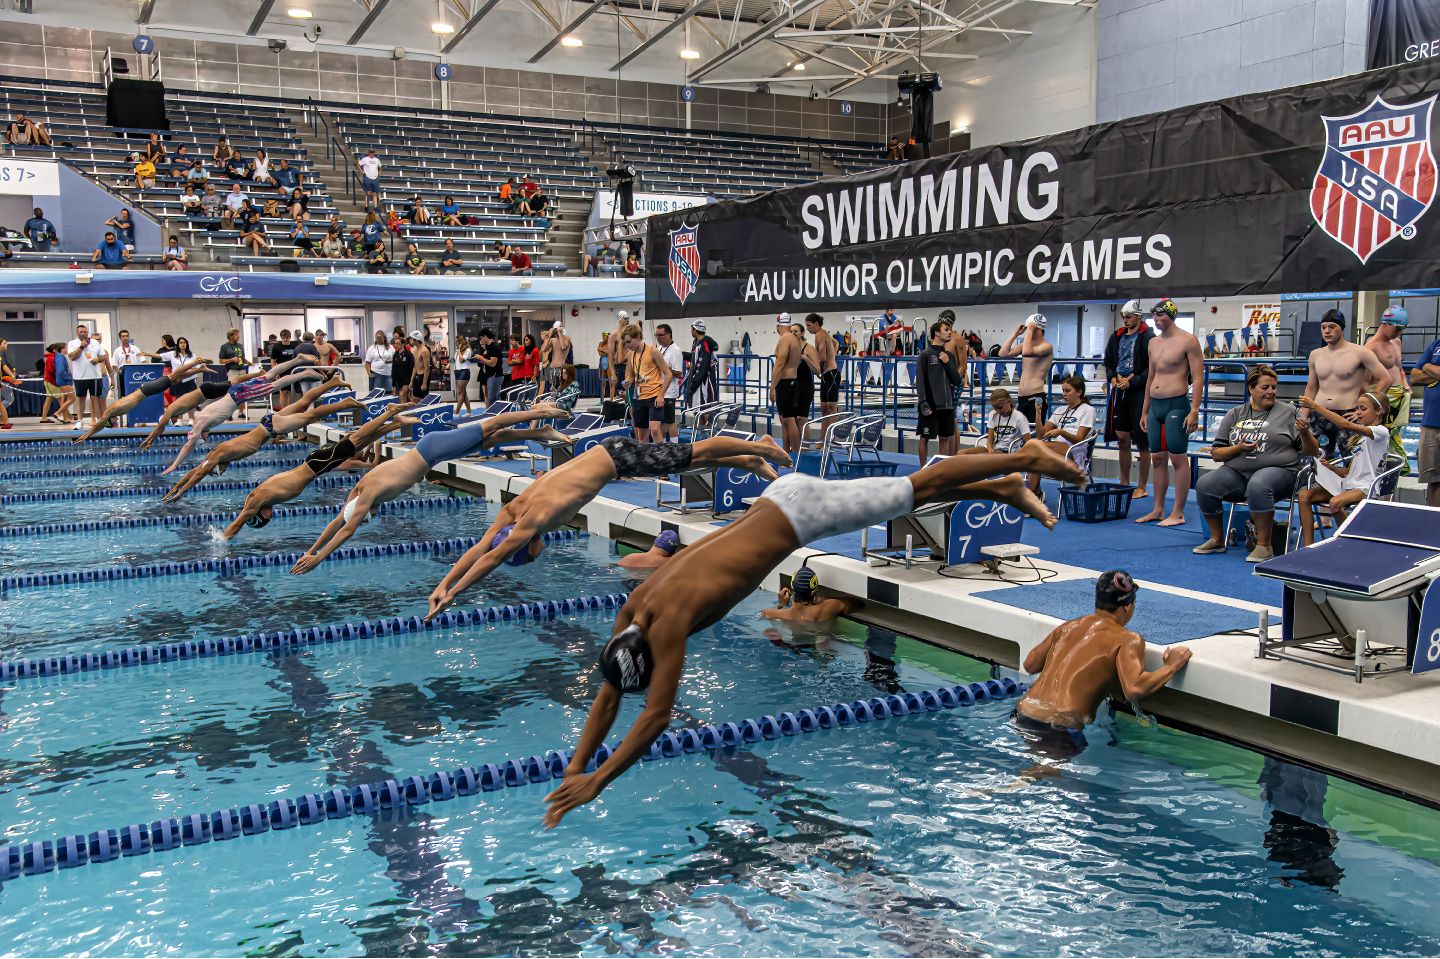 The AAU Junior Olympics will be held July 24 through August 3 at multiple locations in the Triad. Photo courtesy of Greensboro Convention and Visitors Bureau.